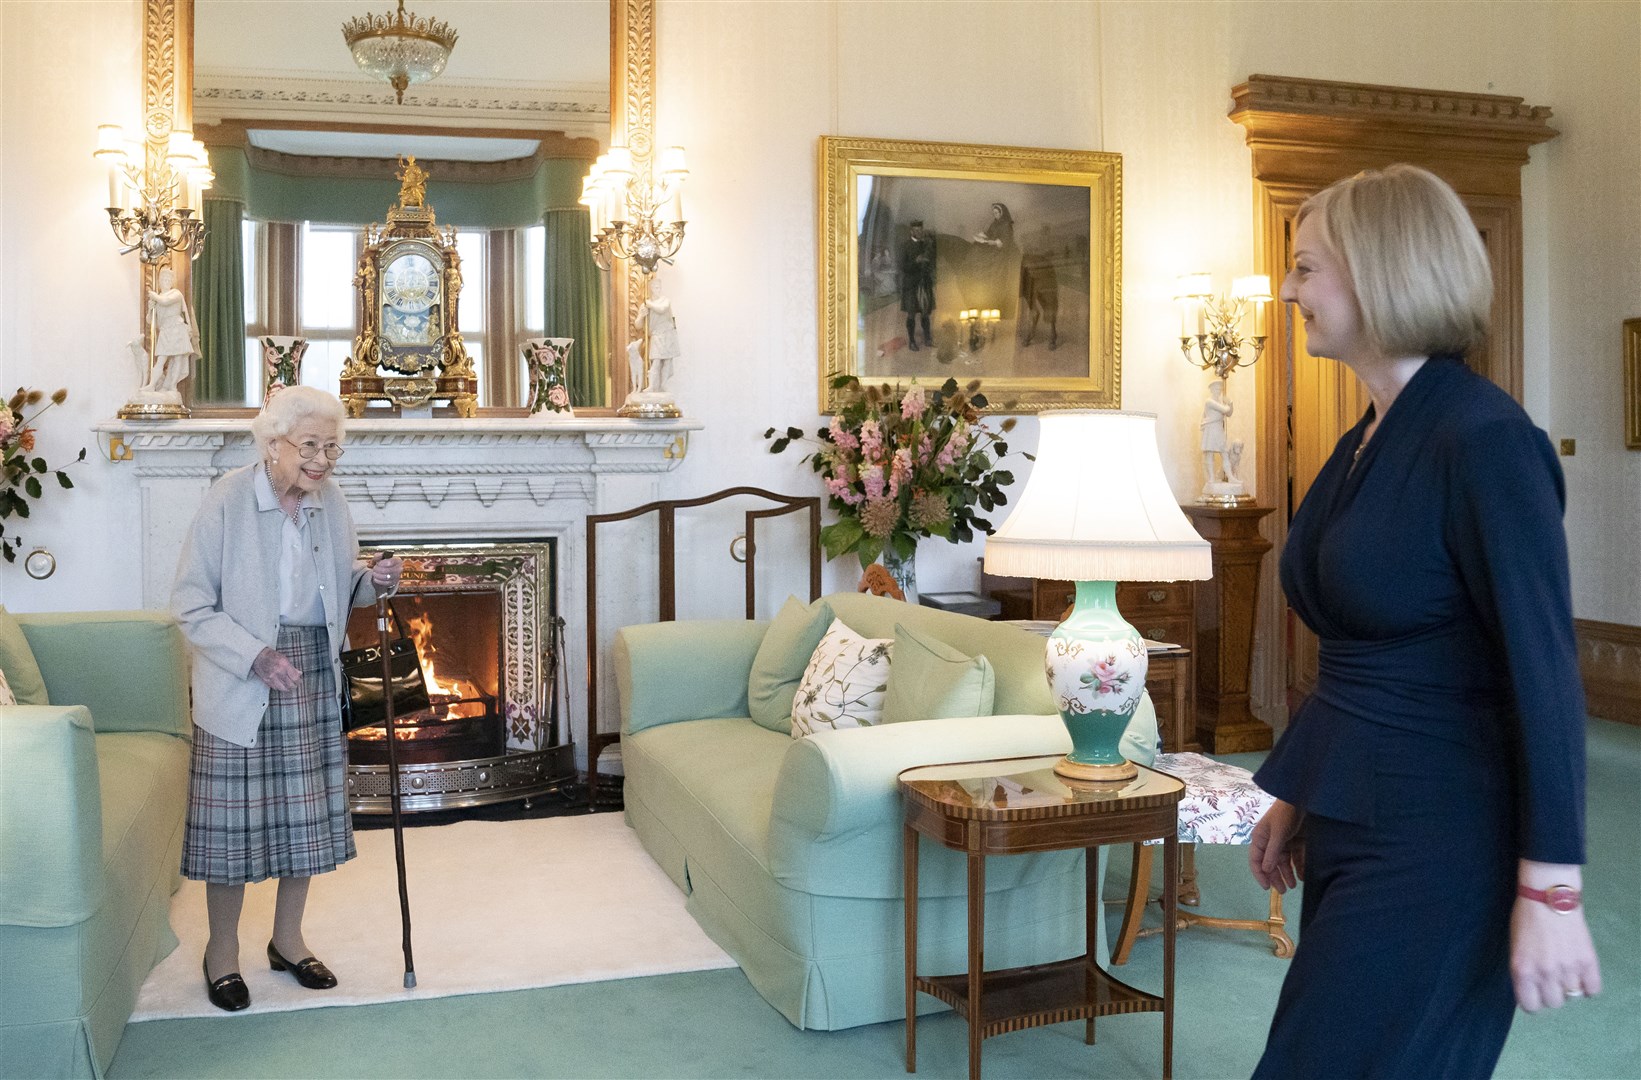 The Queen welcomes Liz Truss during an audience at Balmoral, Scotland, where she invited the newly elected leader of the Conservative party to become Prime Minister (Jane Barlow/PA)